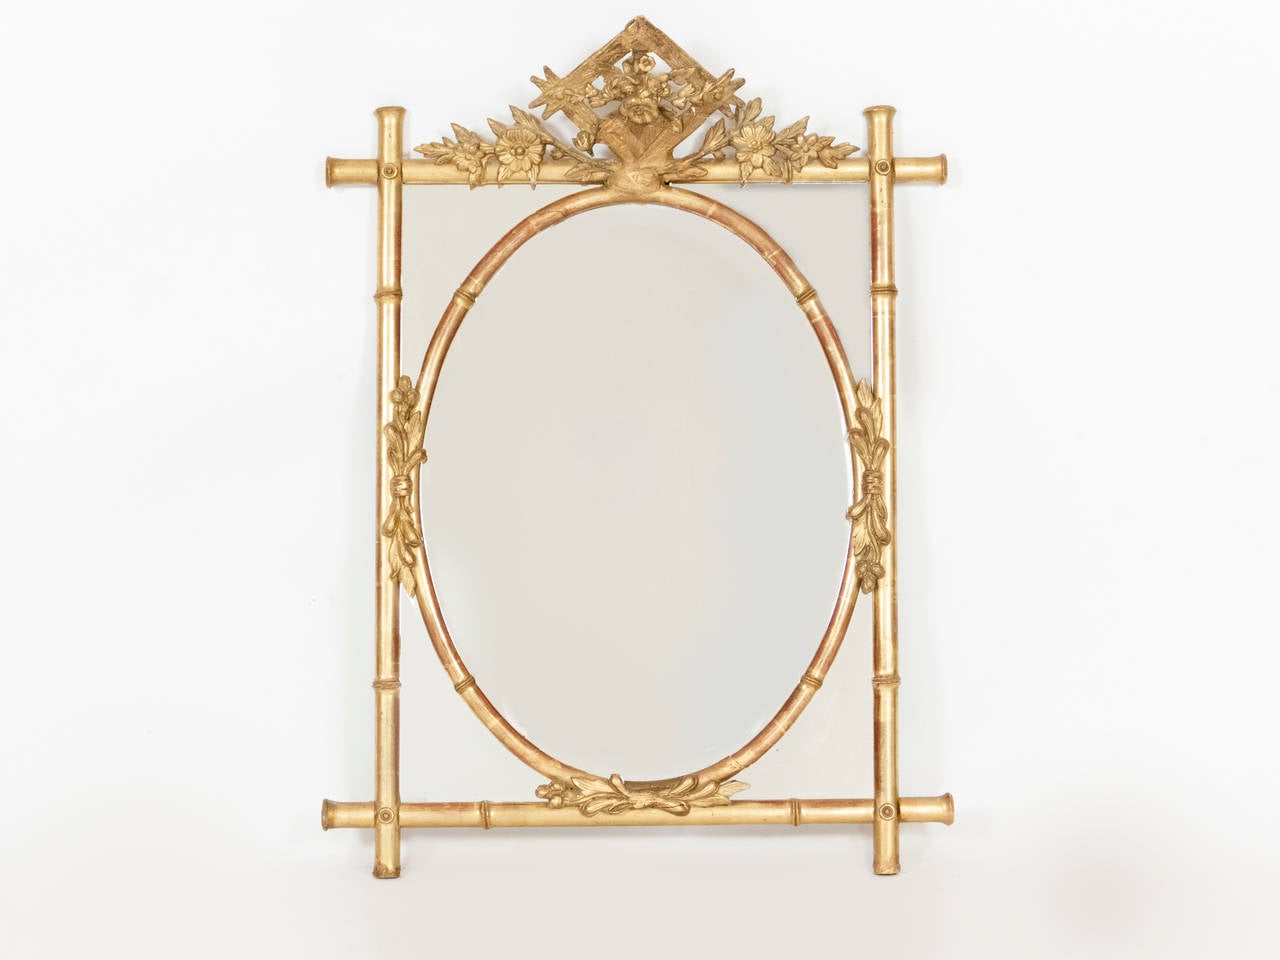 Unusual 1900 century mirror with original mercury mirror and frame.  The mirror has a bamboo motif and an exquisite crown.  Mirror is in our NYC showroom.